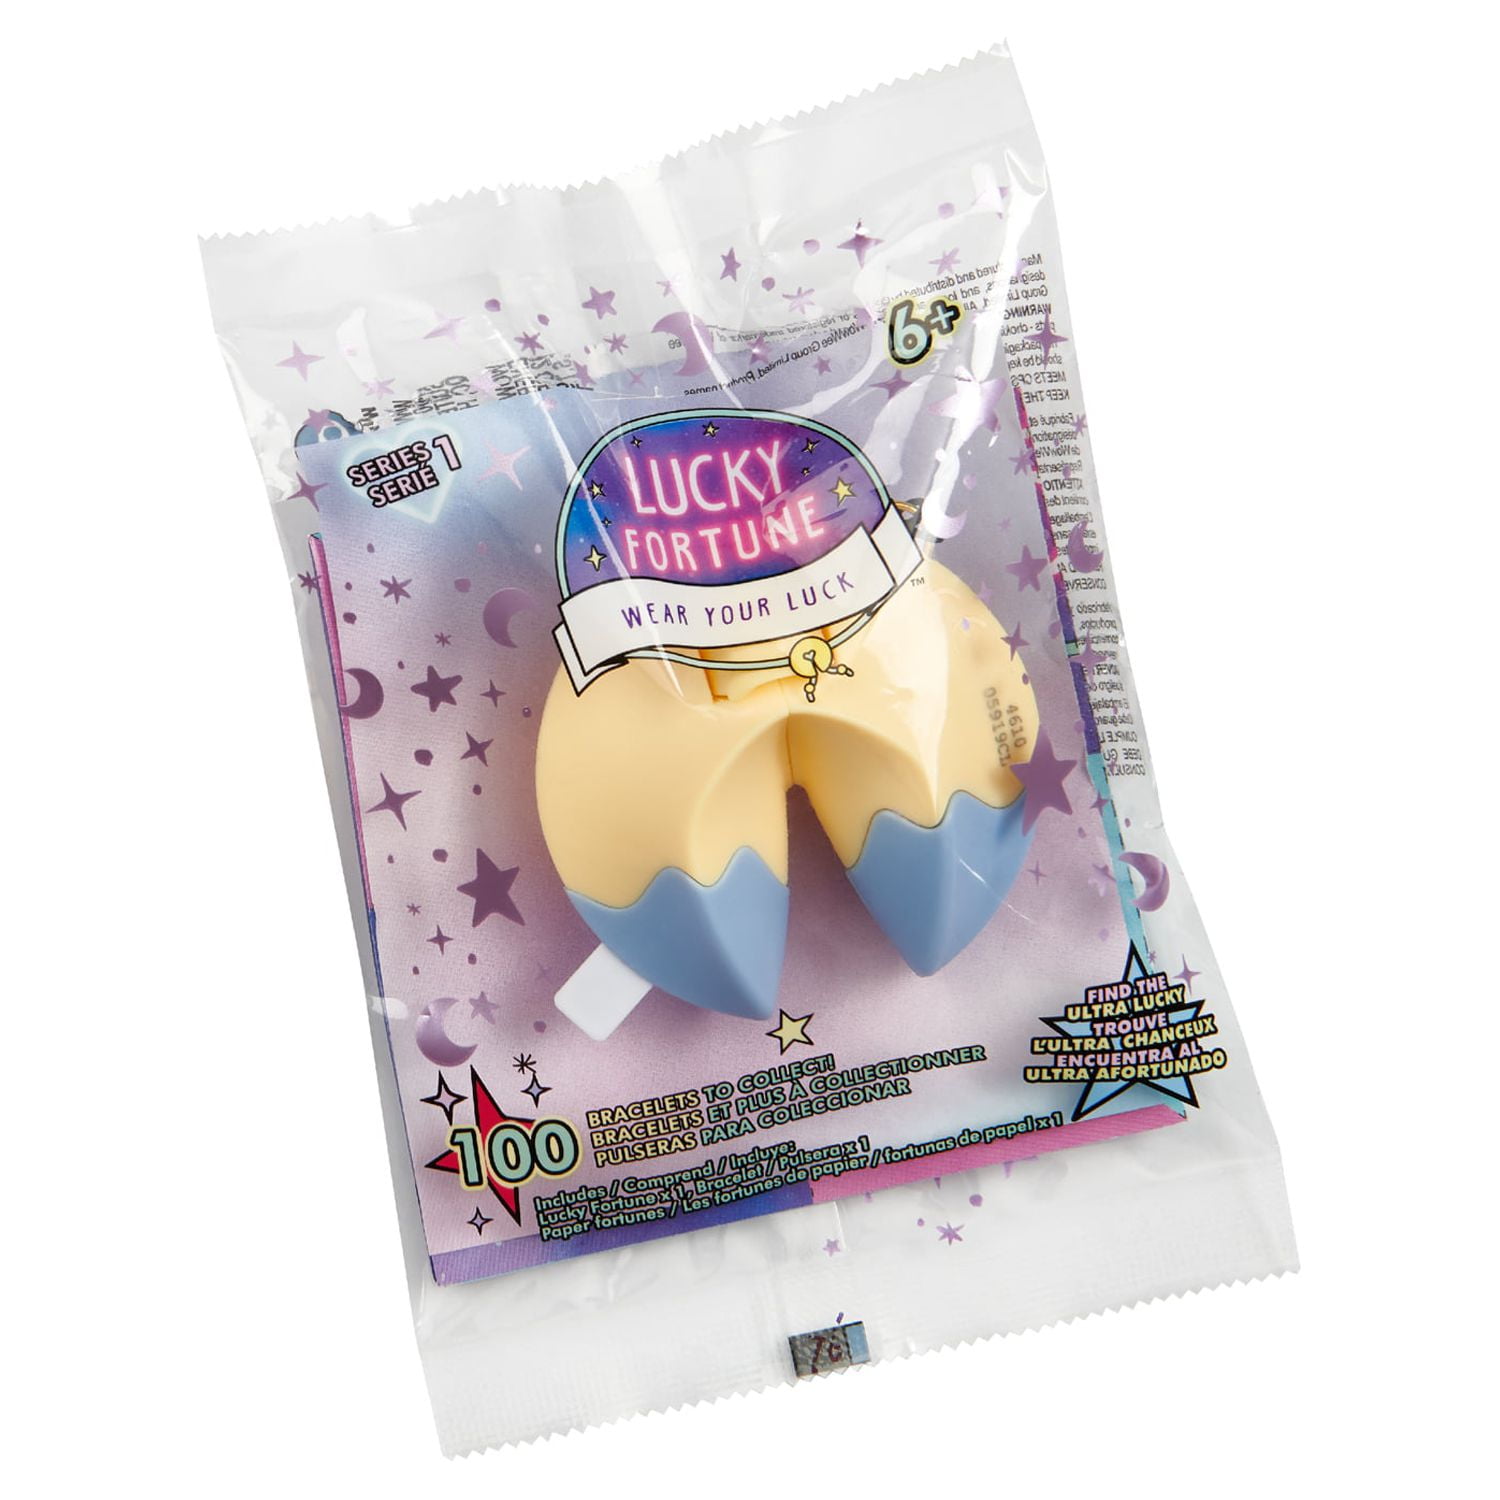 LUCKY FORTUNE Cookie Blind Mystery Bracelet Bags BFF WowWee Charm  Gift-2Packs